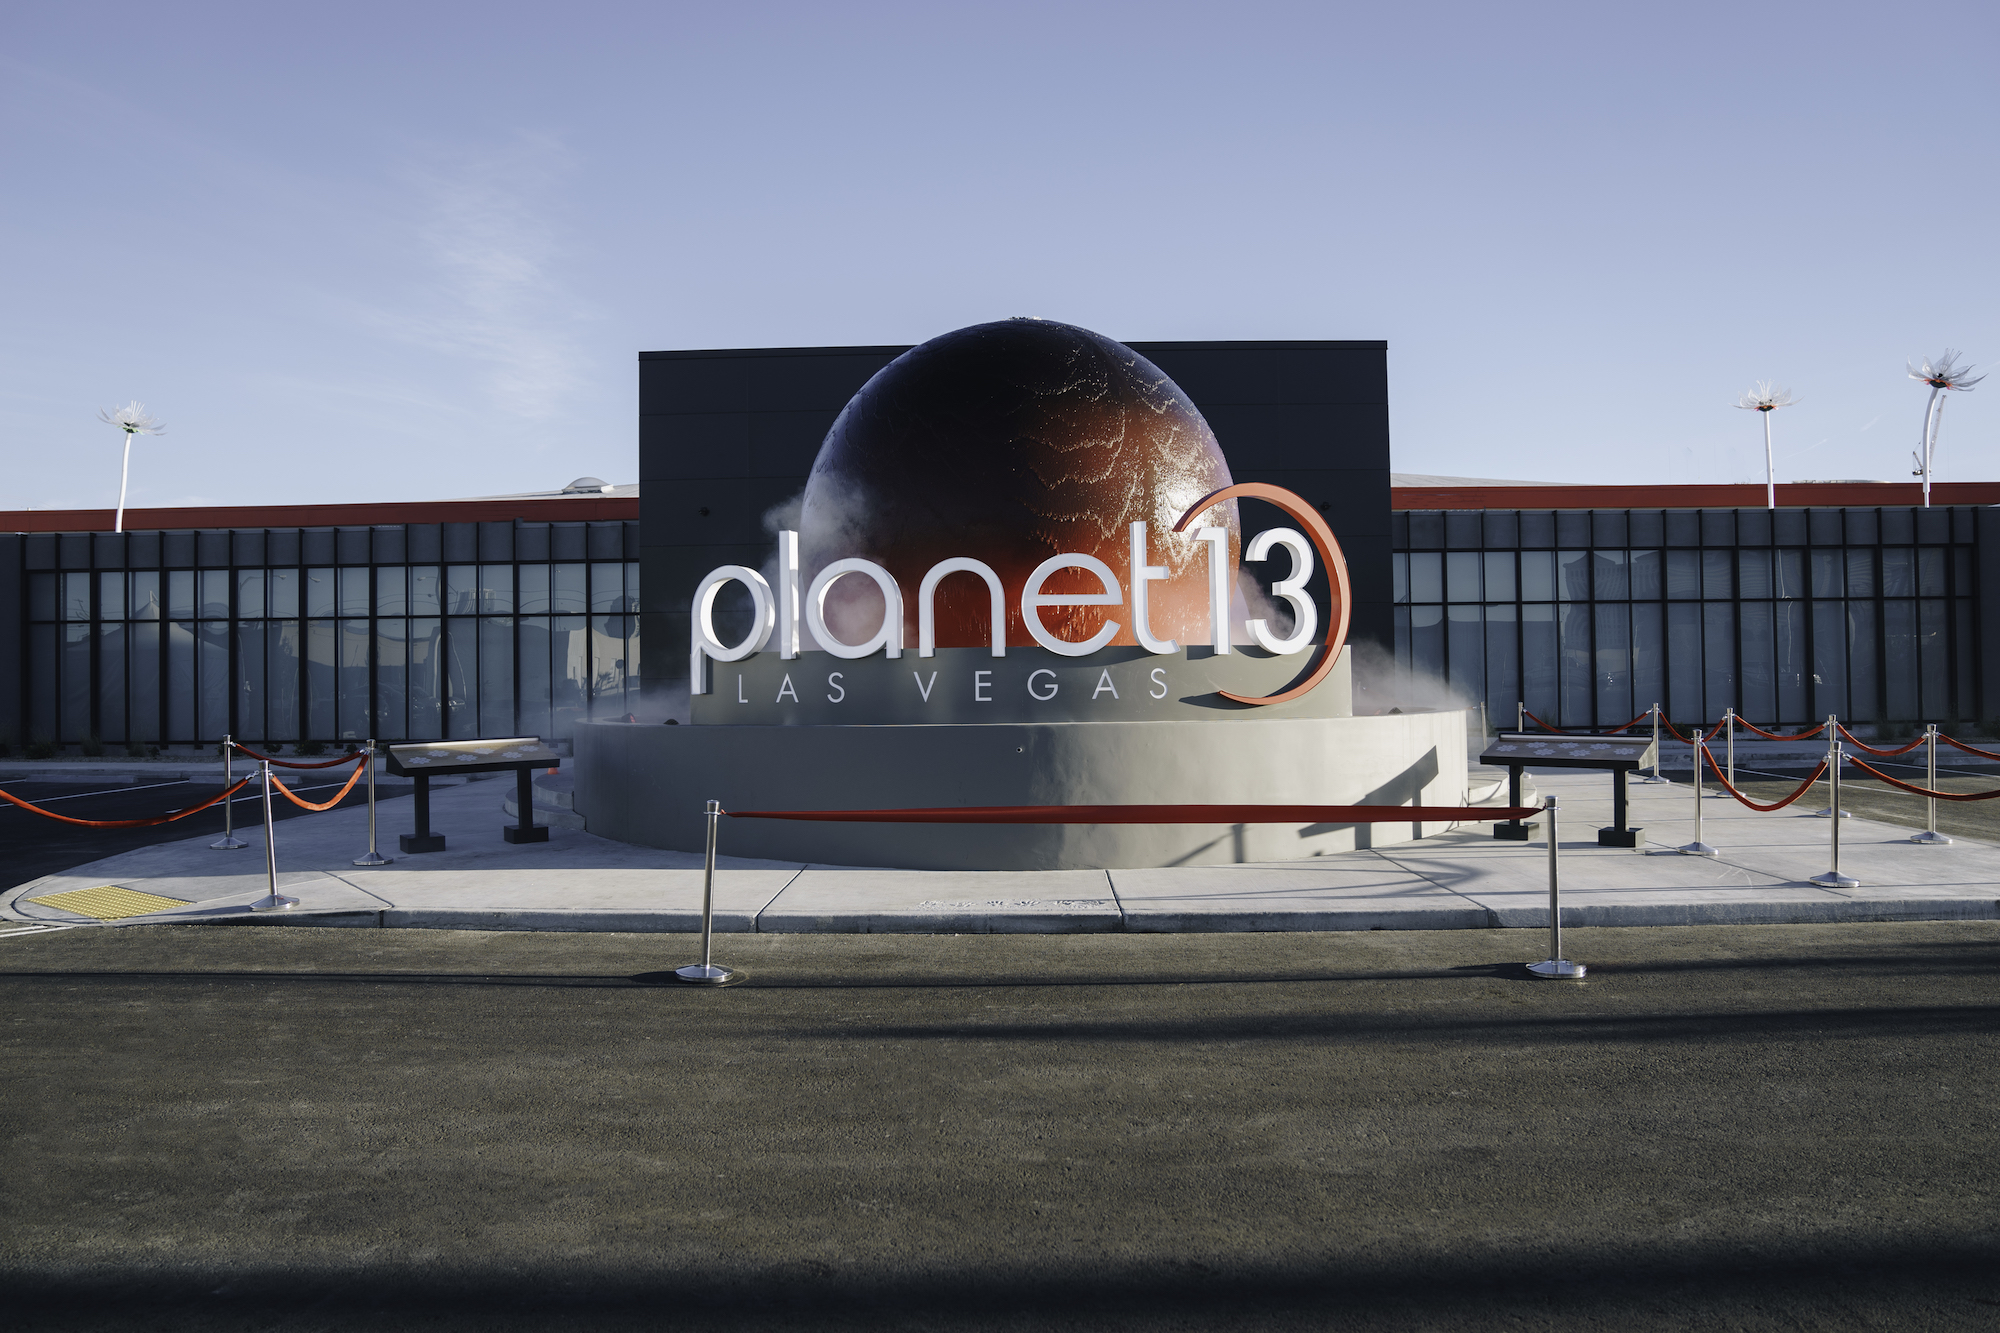 Planet 13 sees revenue swell as tourists flock back to its Las Vegas cannabis SuperStore